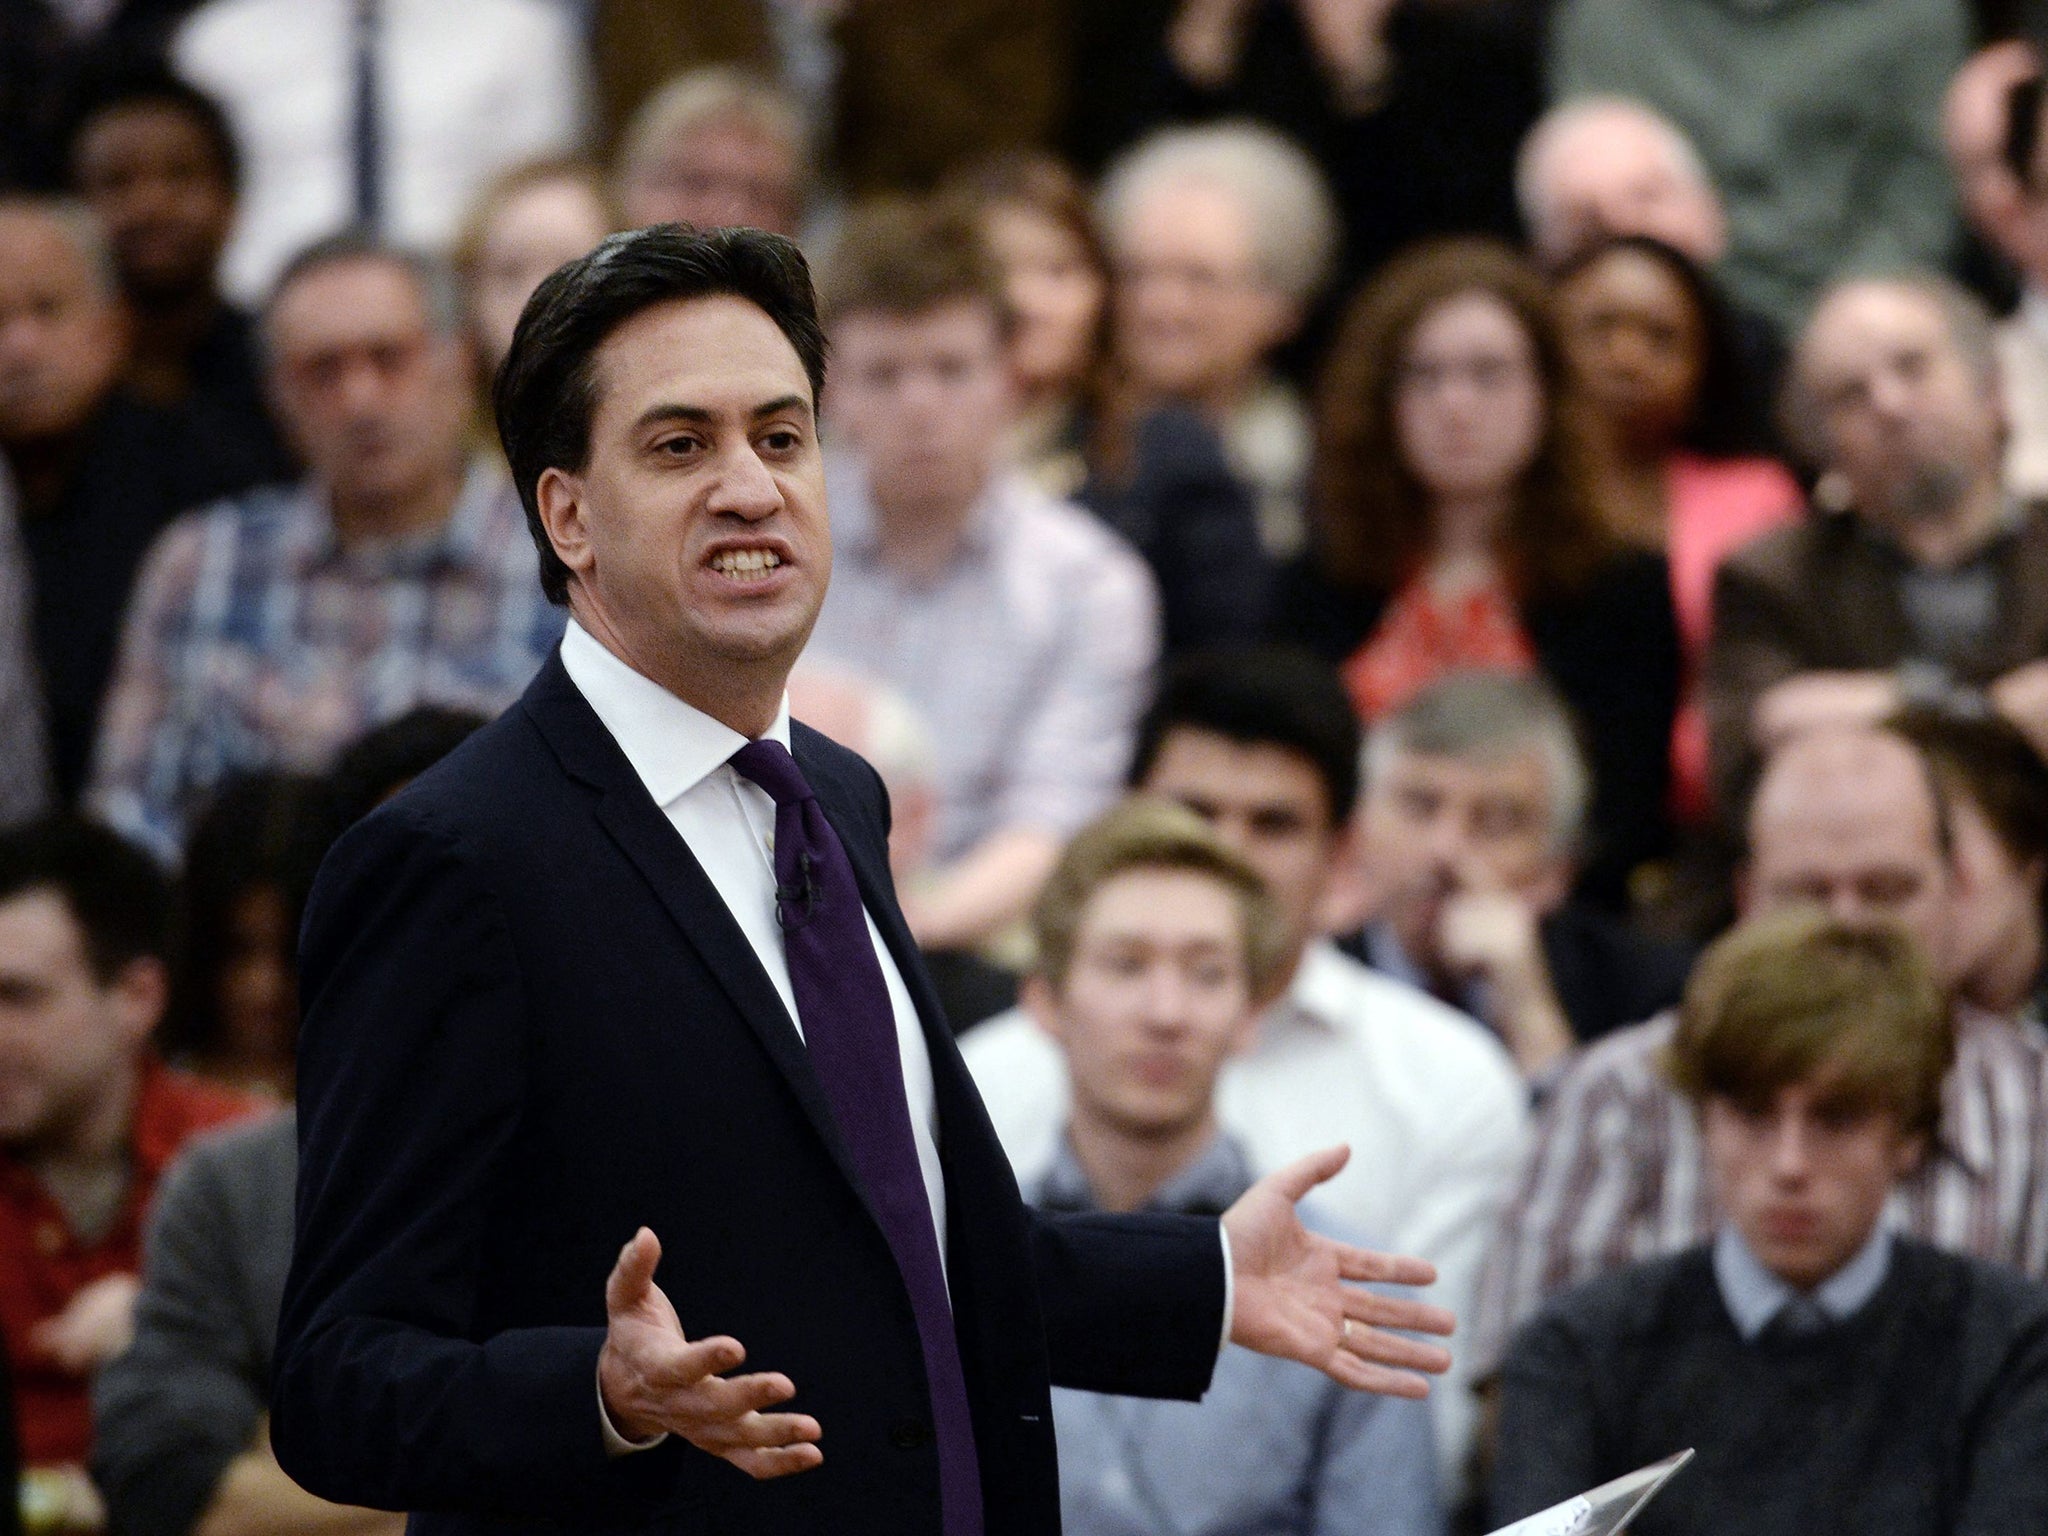 Labour leader Ed Miliband during his speech to party supporters at the University of London